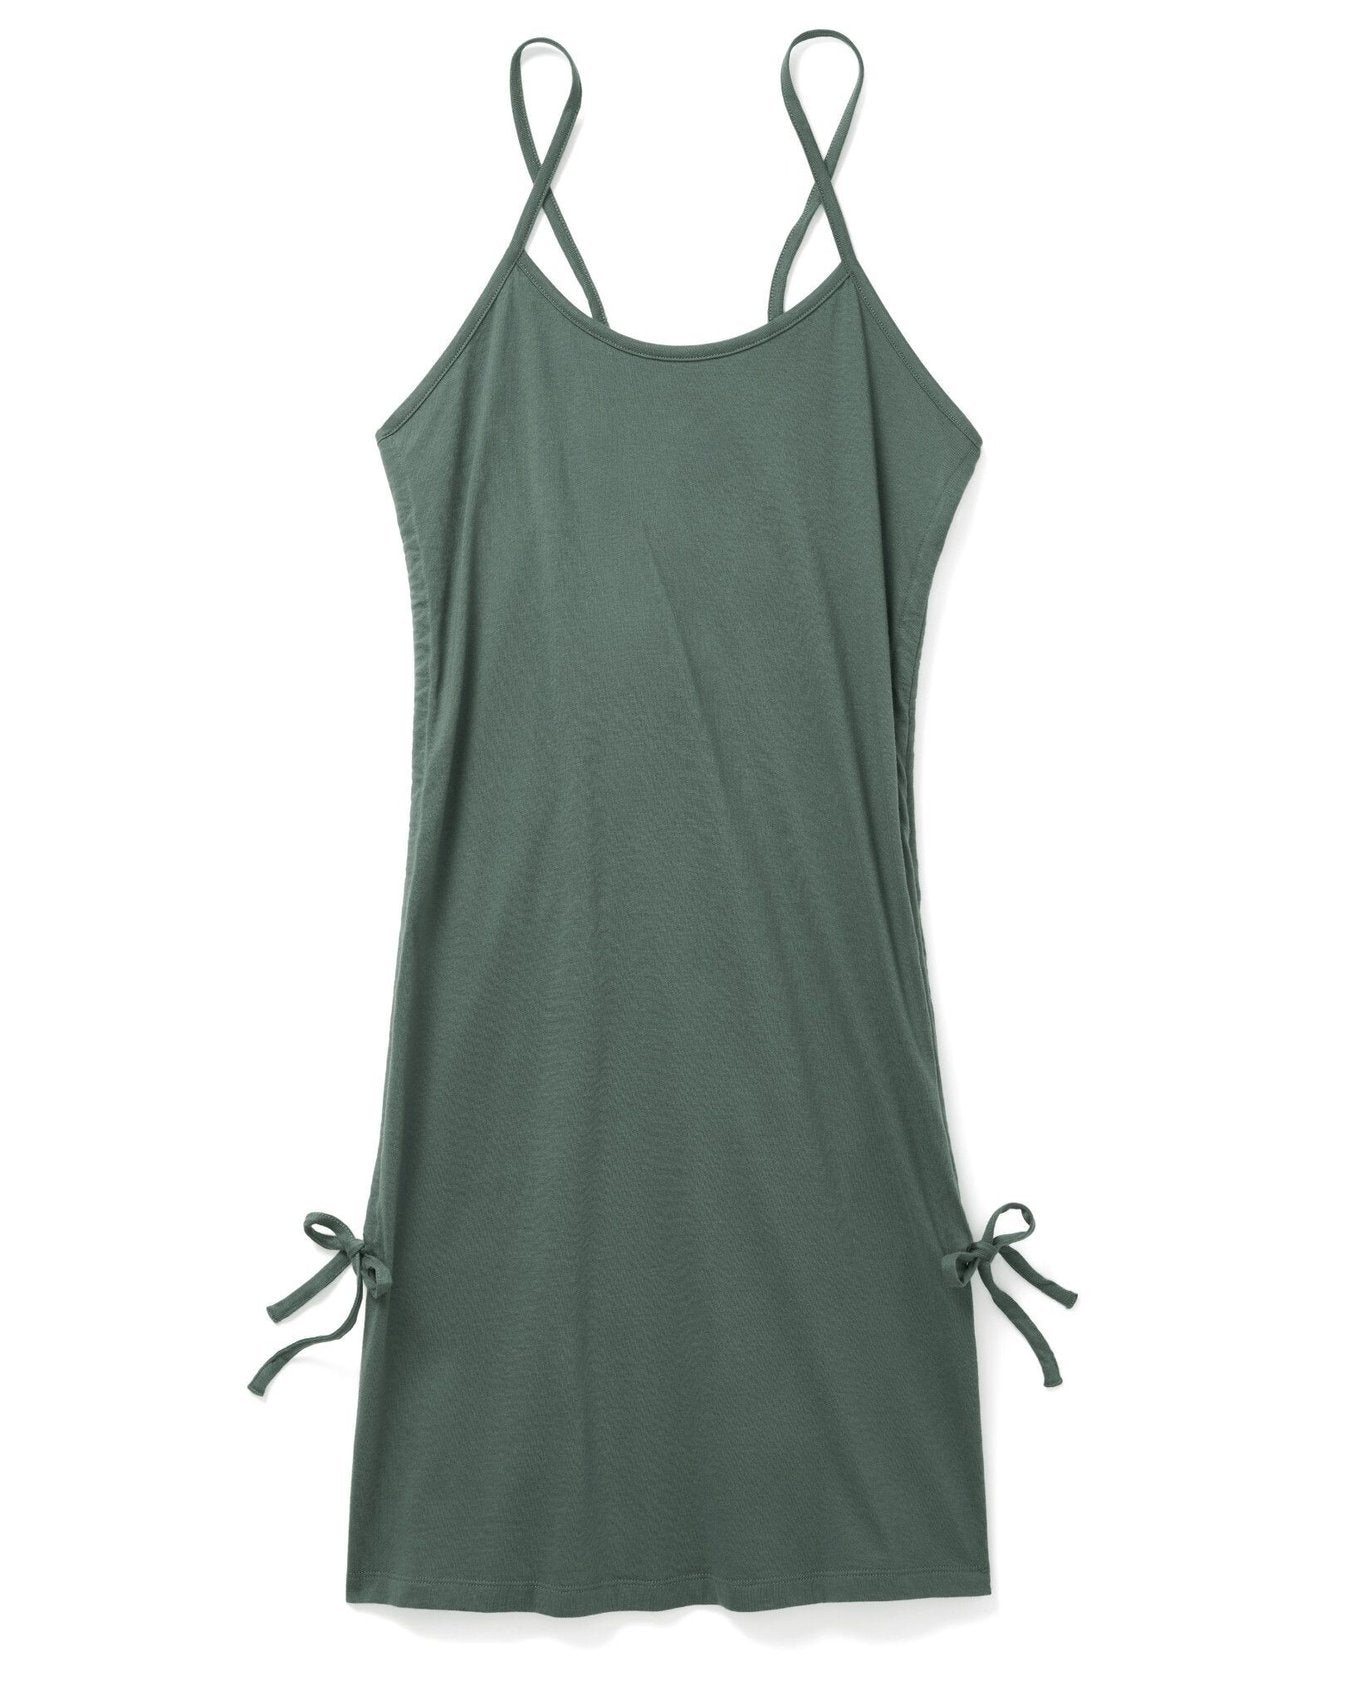 Adore Me Rosemarie Knit Slip in color Silver Pine and shape slip